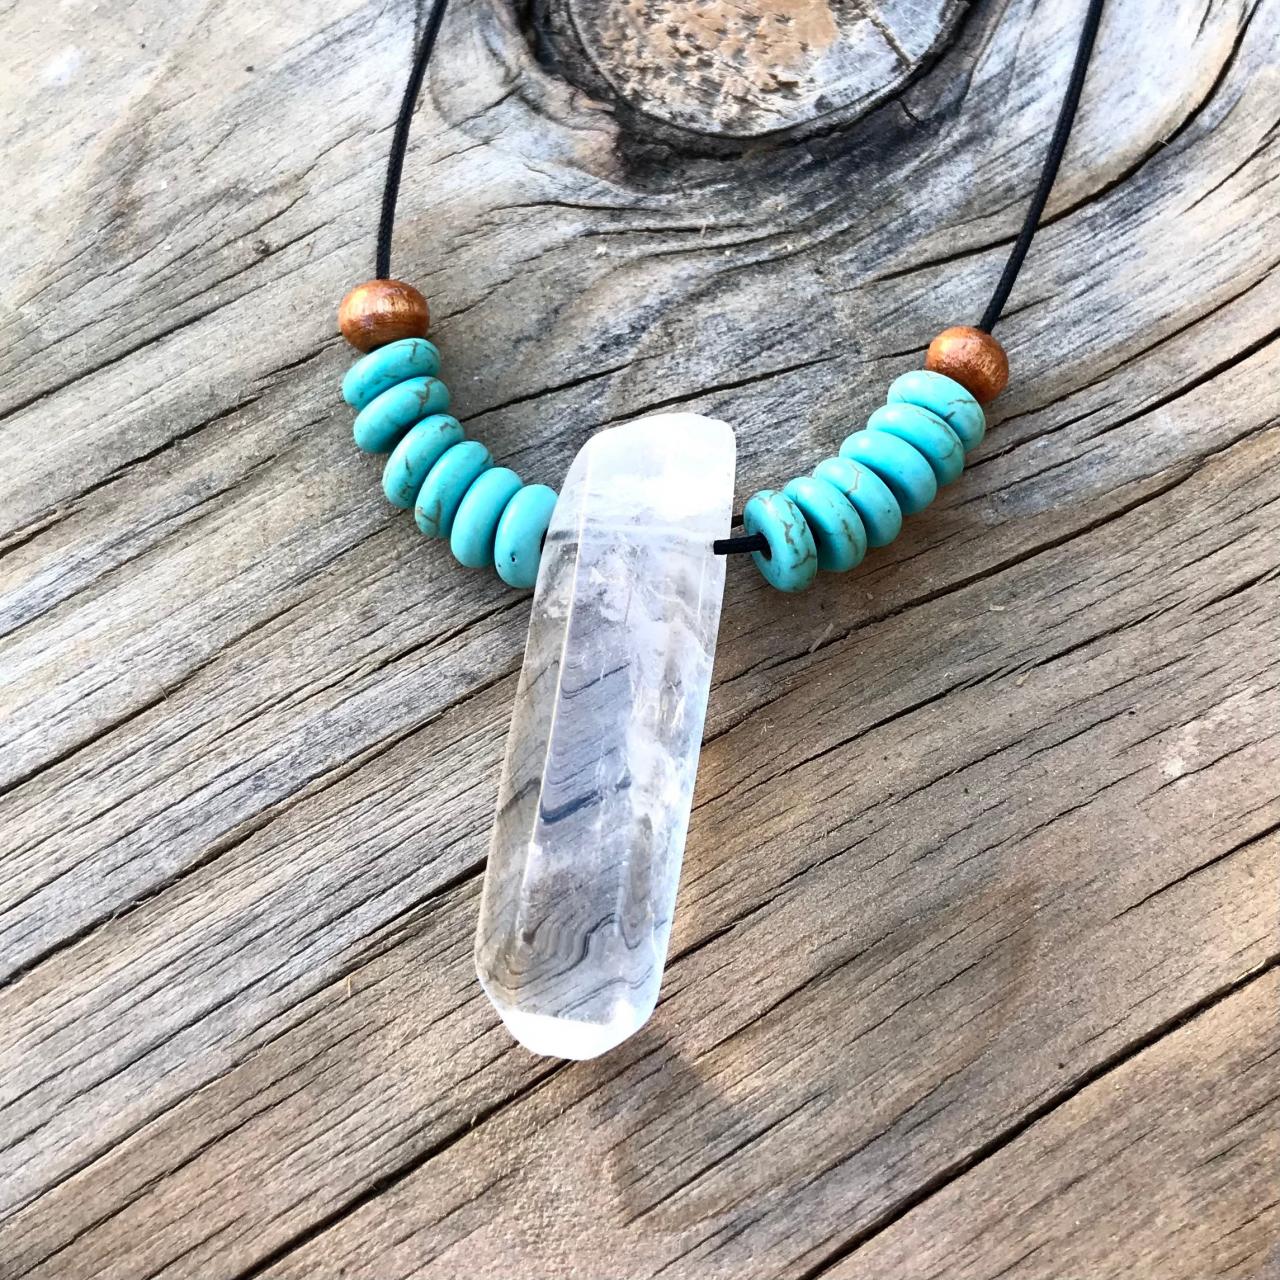 Xl Length Quartz Crystal With Turquoise And Wood Accent Beads. Made With A Copper Clasp. Approximately 31 Inch Length Cord